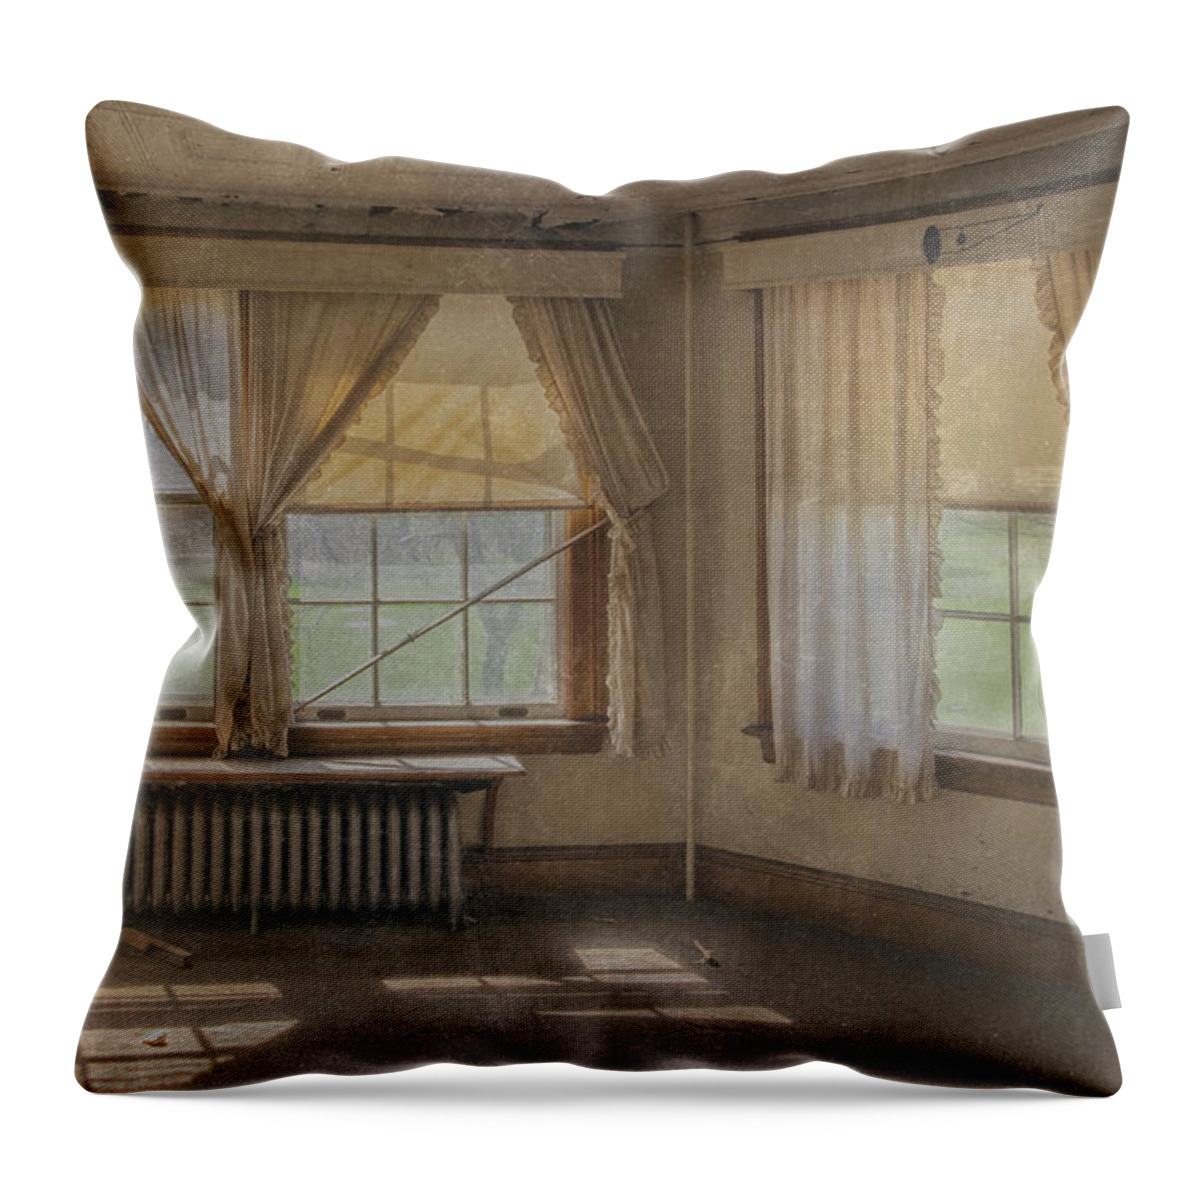 He Brattleboro Retreat Meadows Throw Pillow featuring the photograph Faded Elegance #1 by Tom Singleton